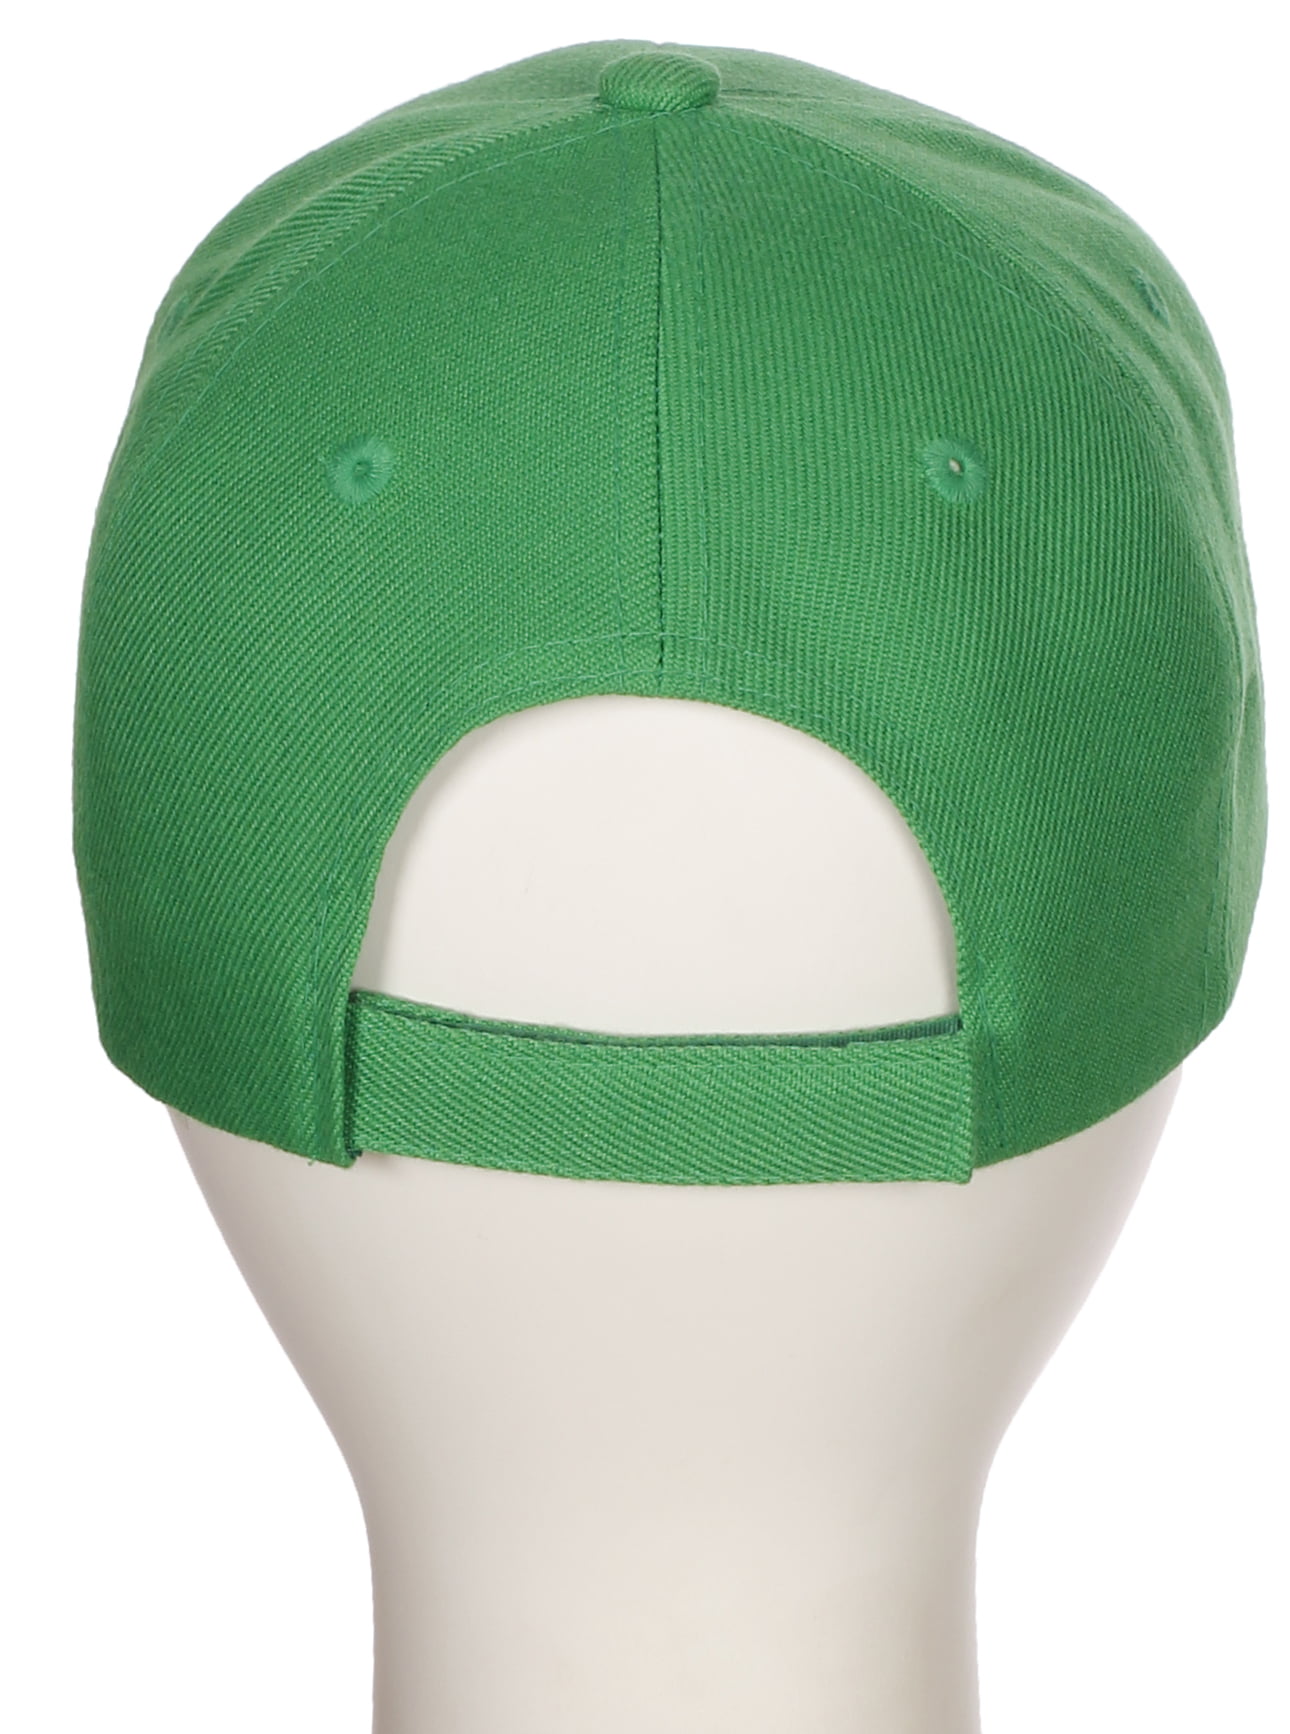 Green Single ONLY hat and cap WOMEN FASHION Accessories Hat and cap Green discount 54% 